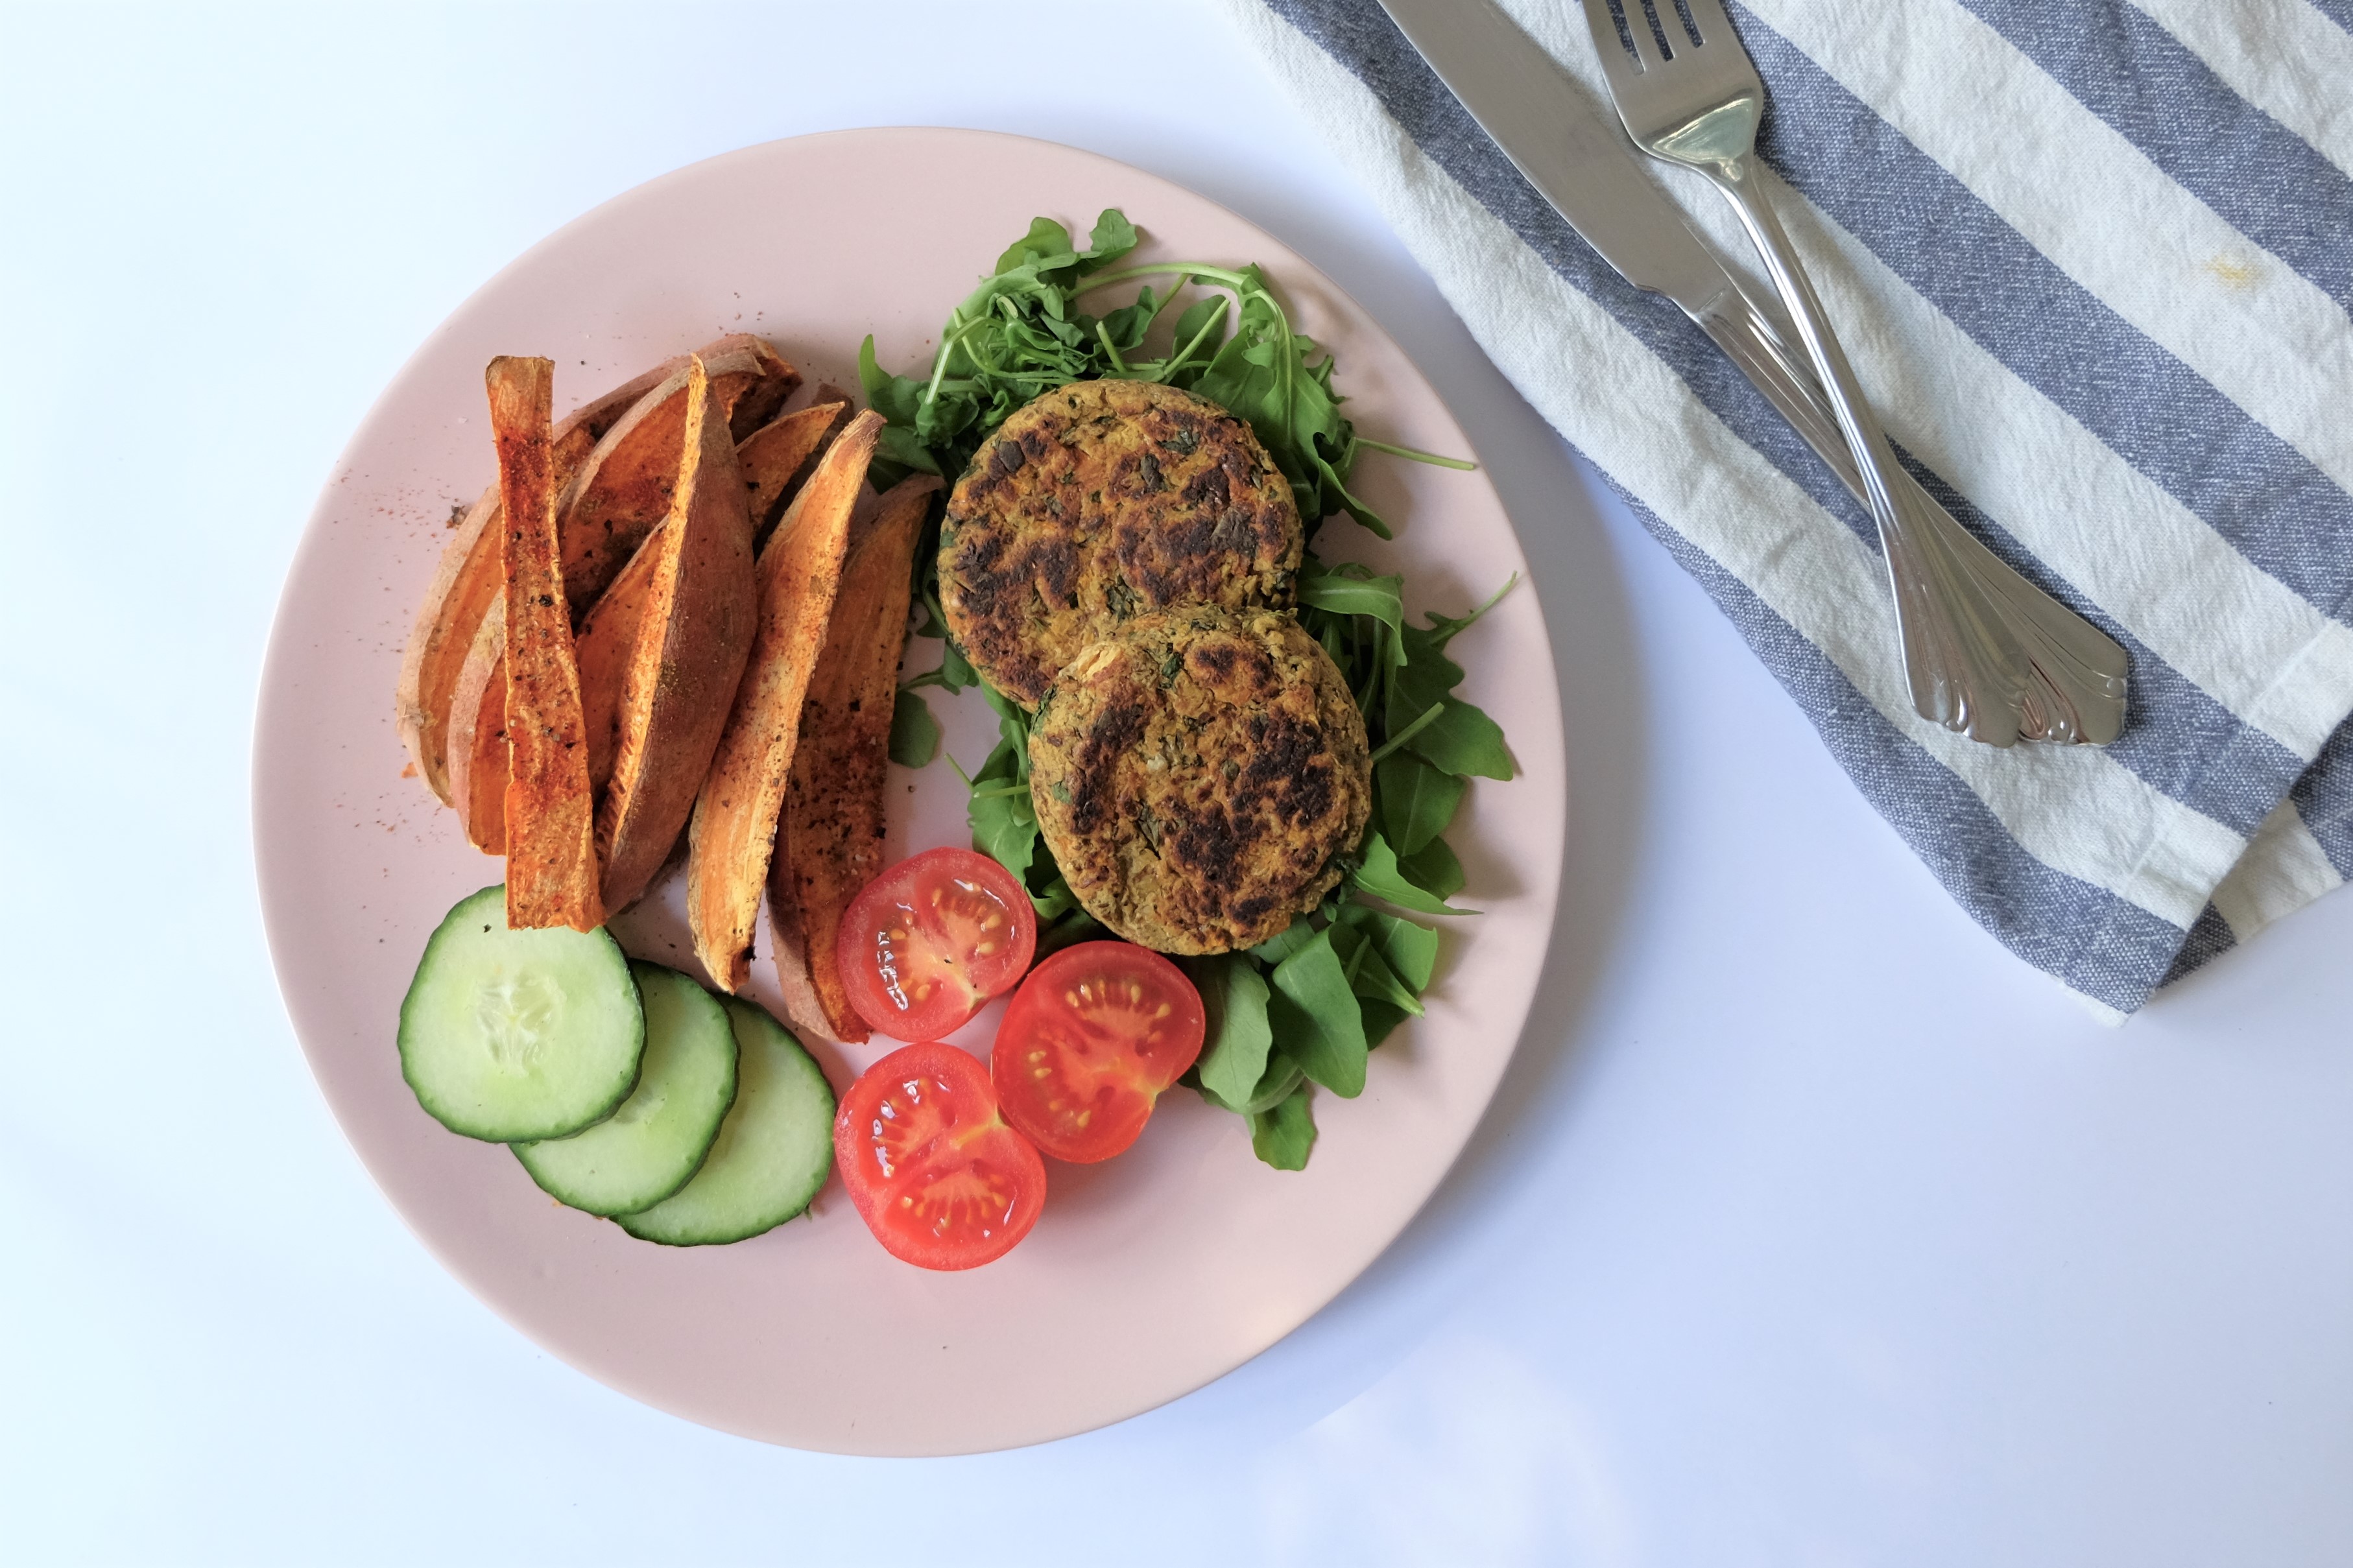 Chickpea and Almond Vegan Burger Recipe by Mindy Perley-Martin